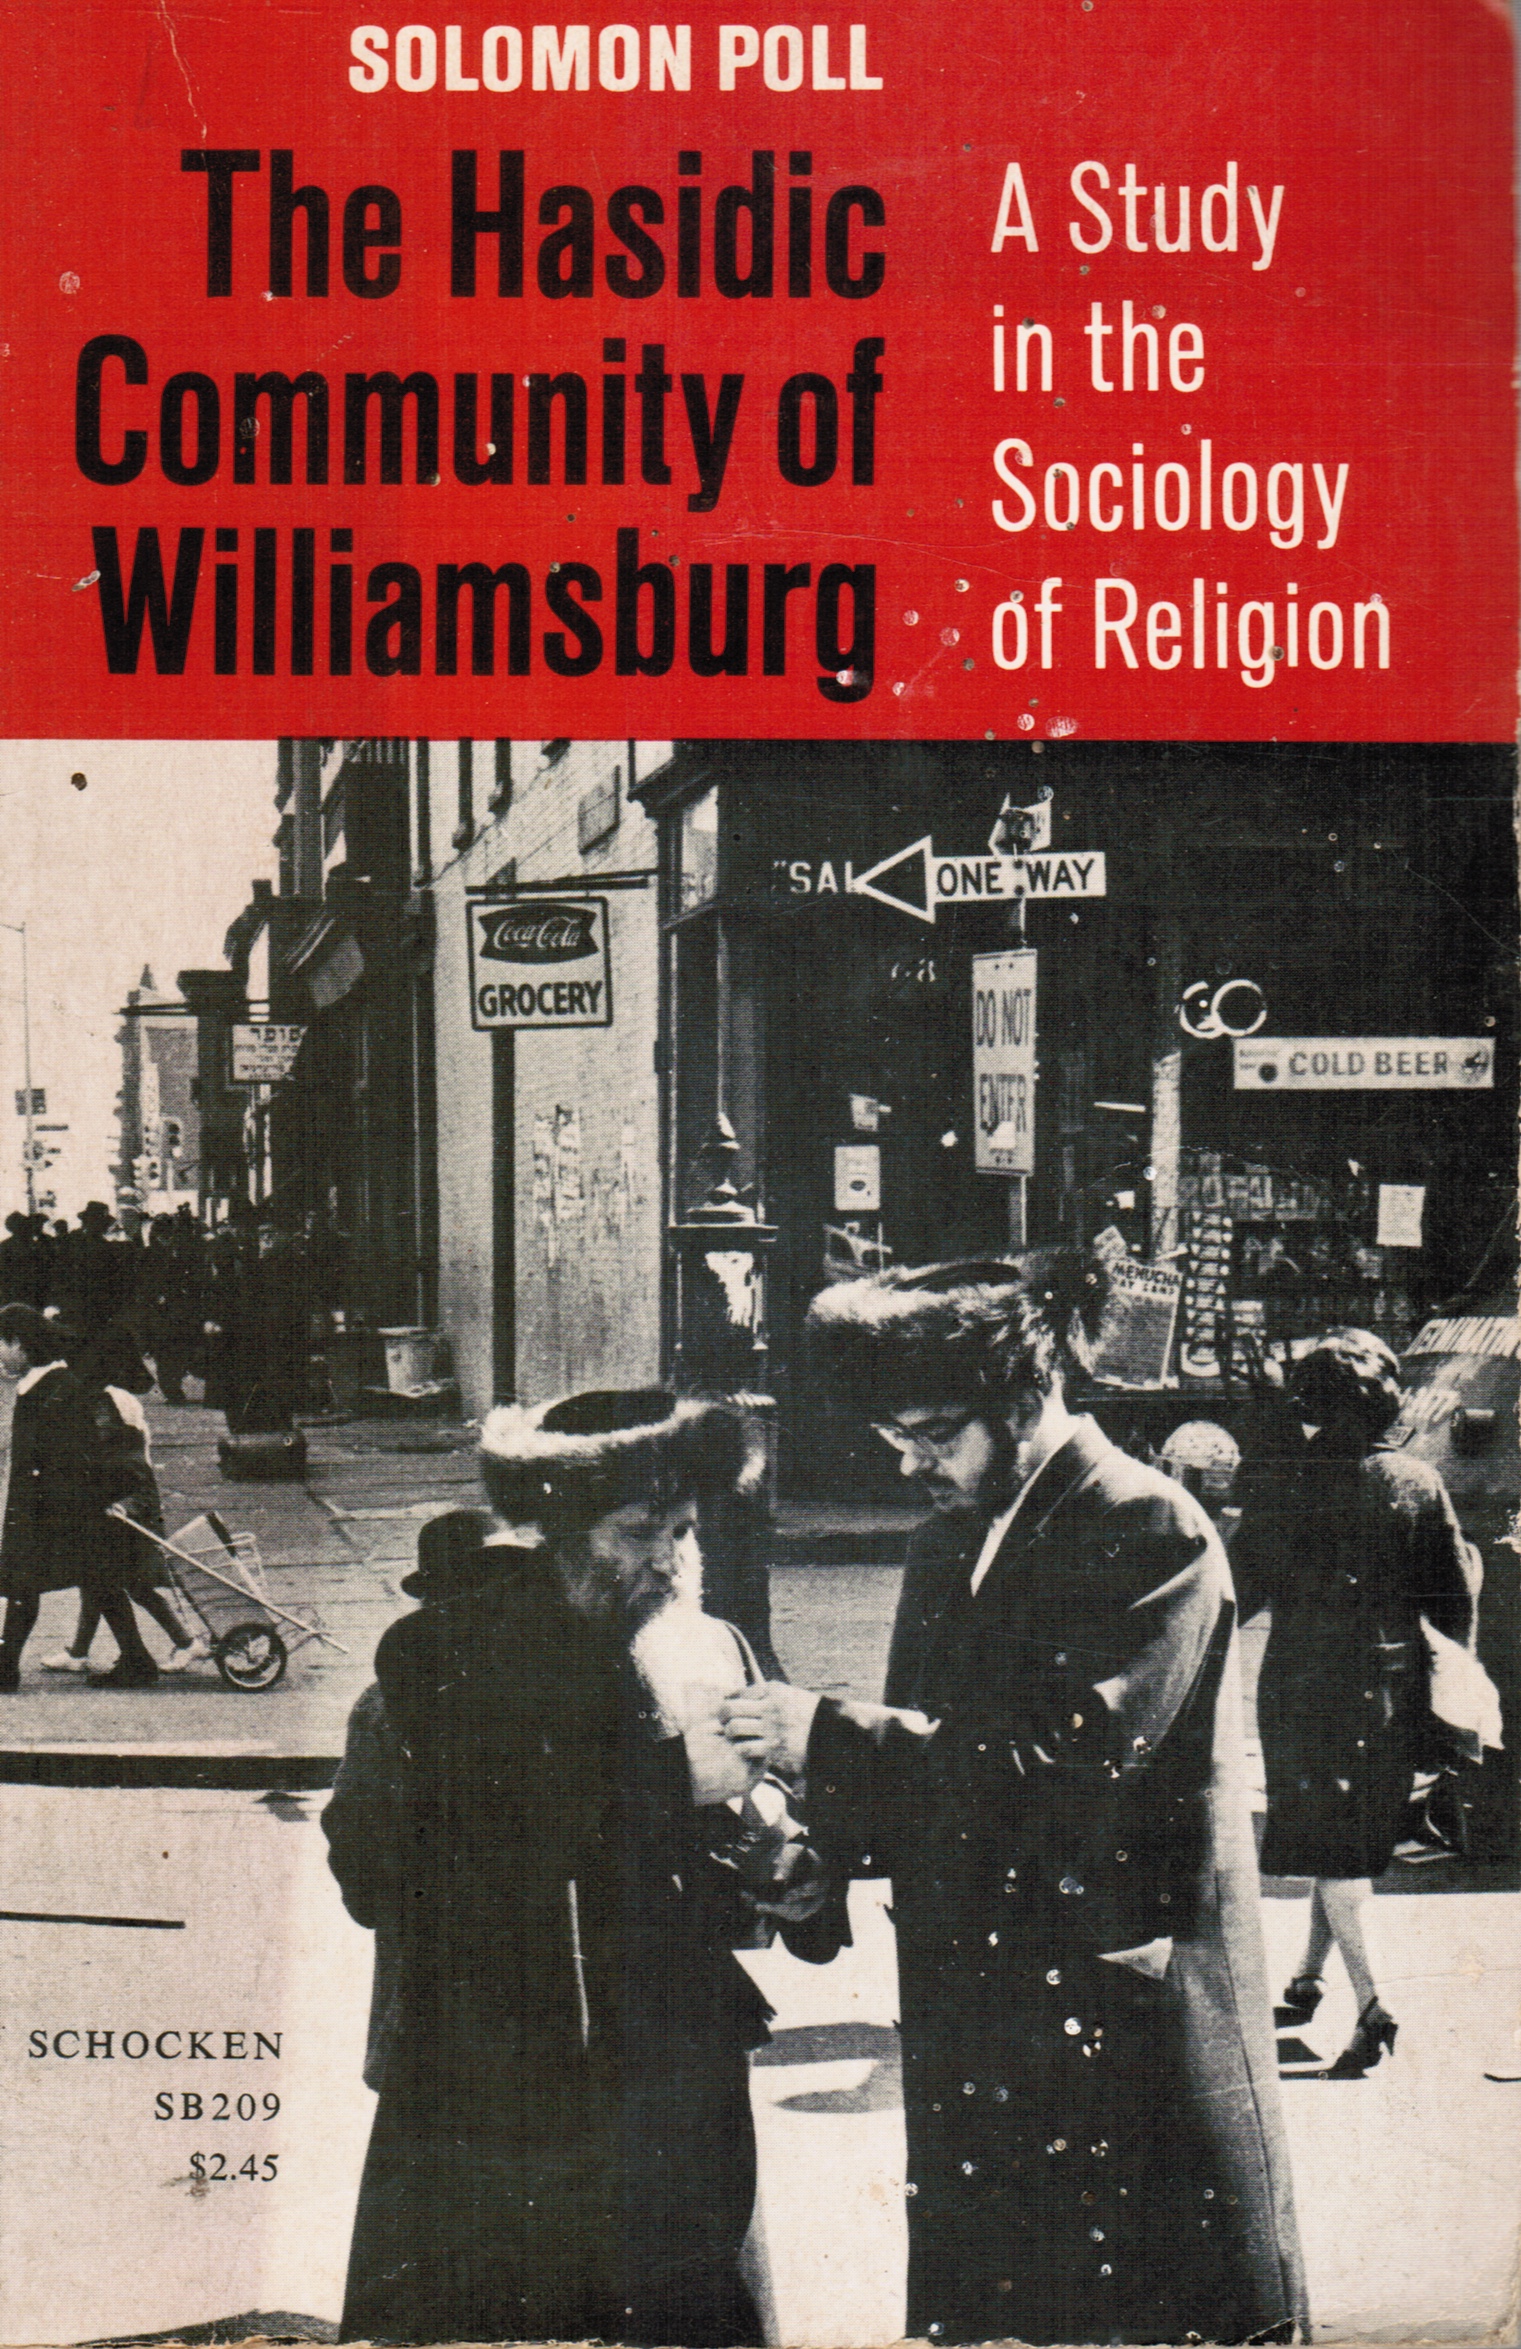 POLL, SOLOMON - The Hasidic Community of Williamsburg: A Study in the Sociology of Religion